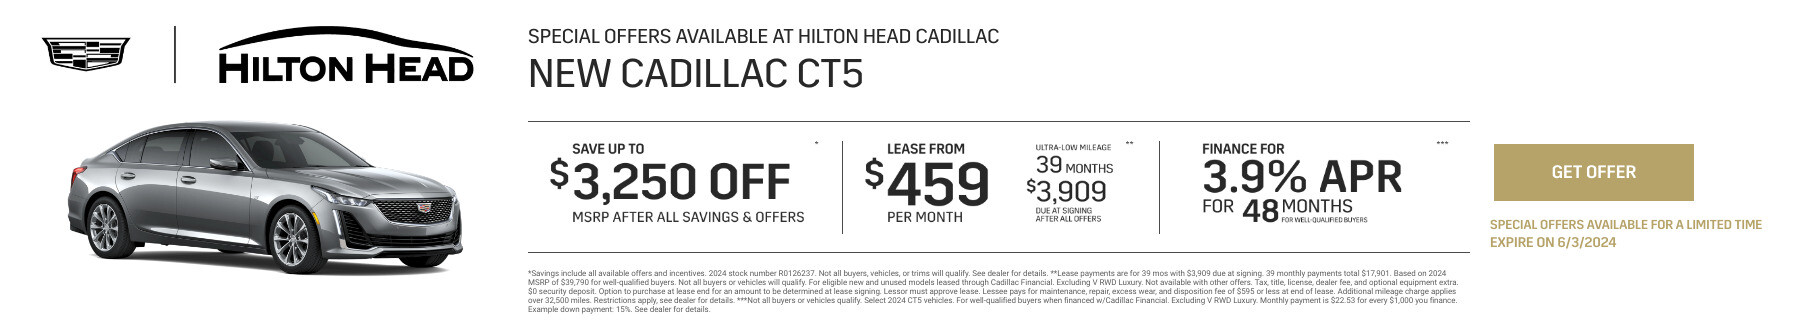 New Cadillac CT5 Current Deals and Offers in Savannah, GA